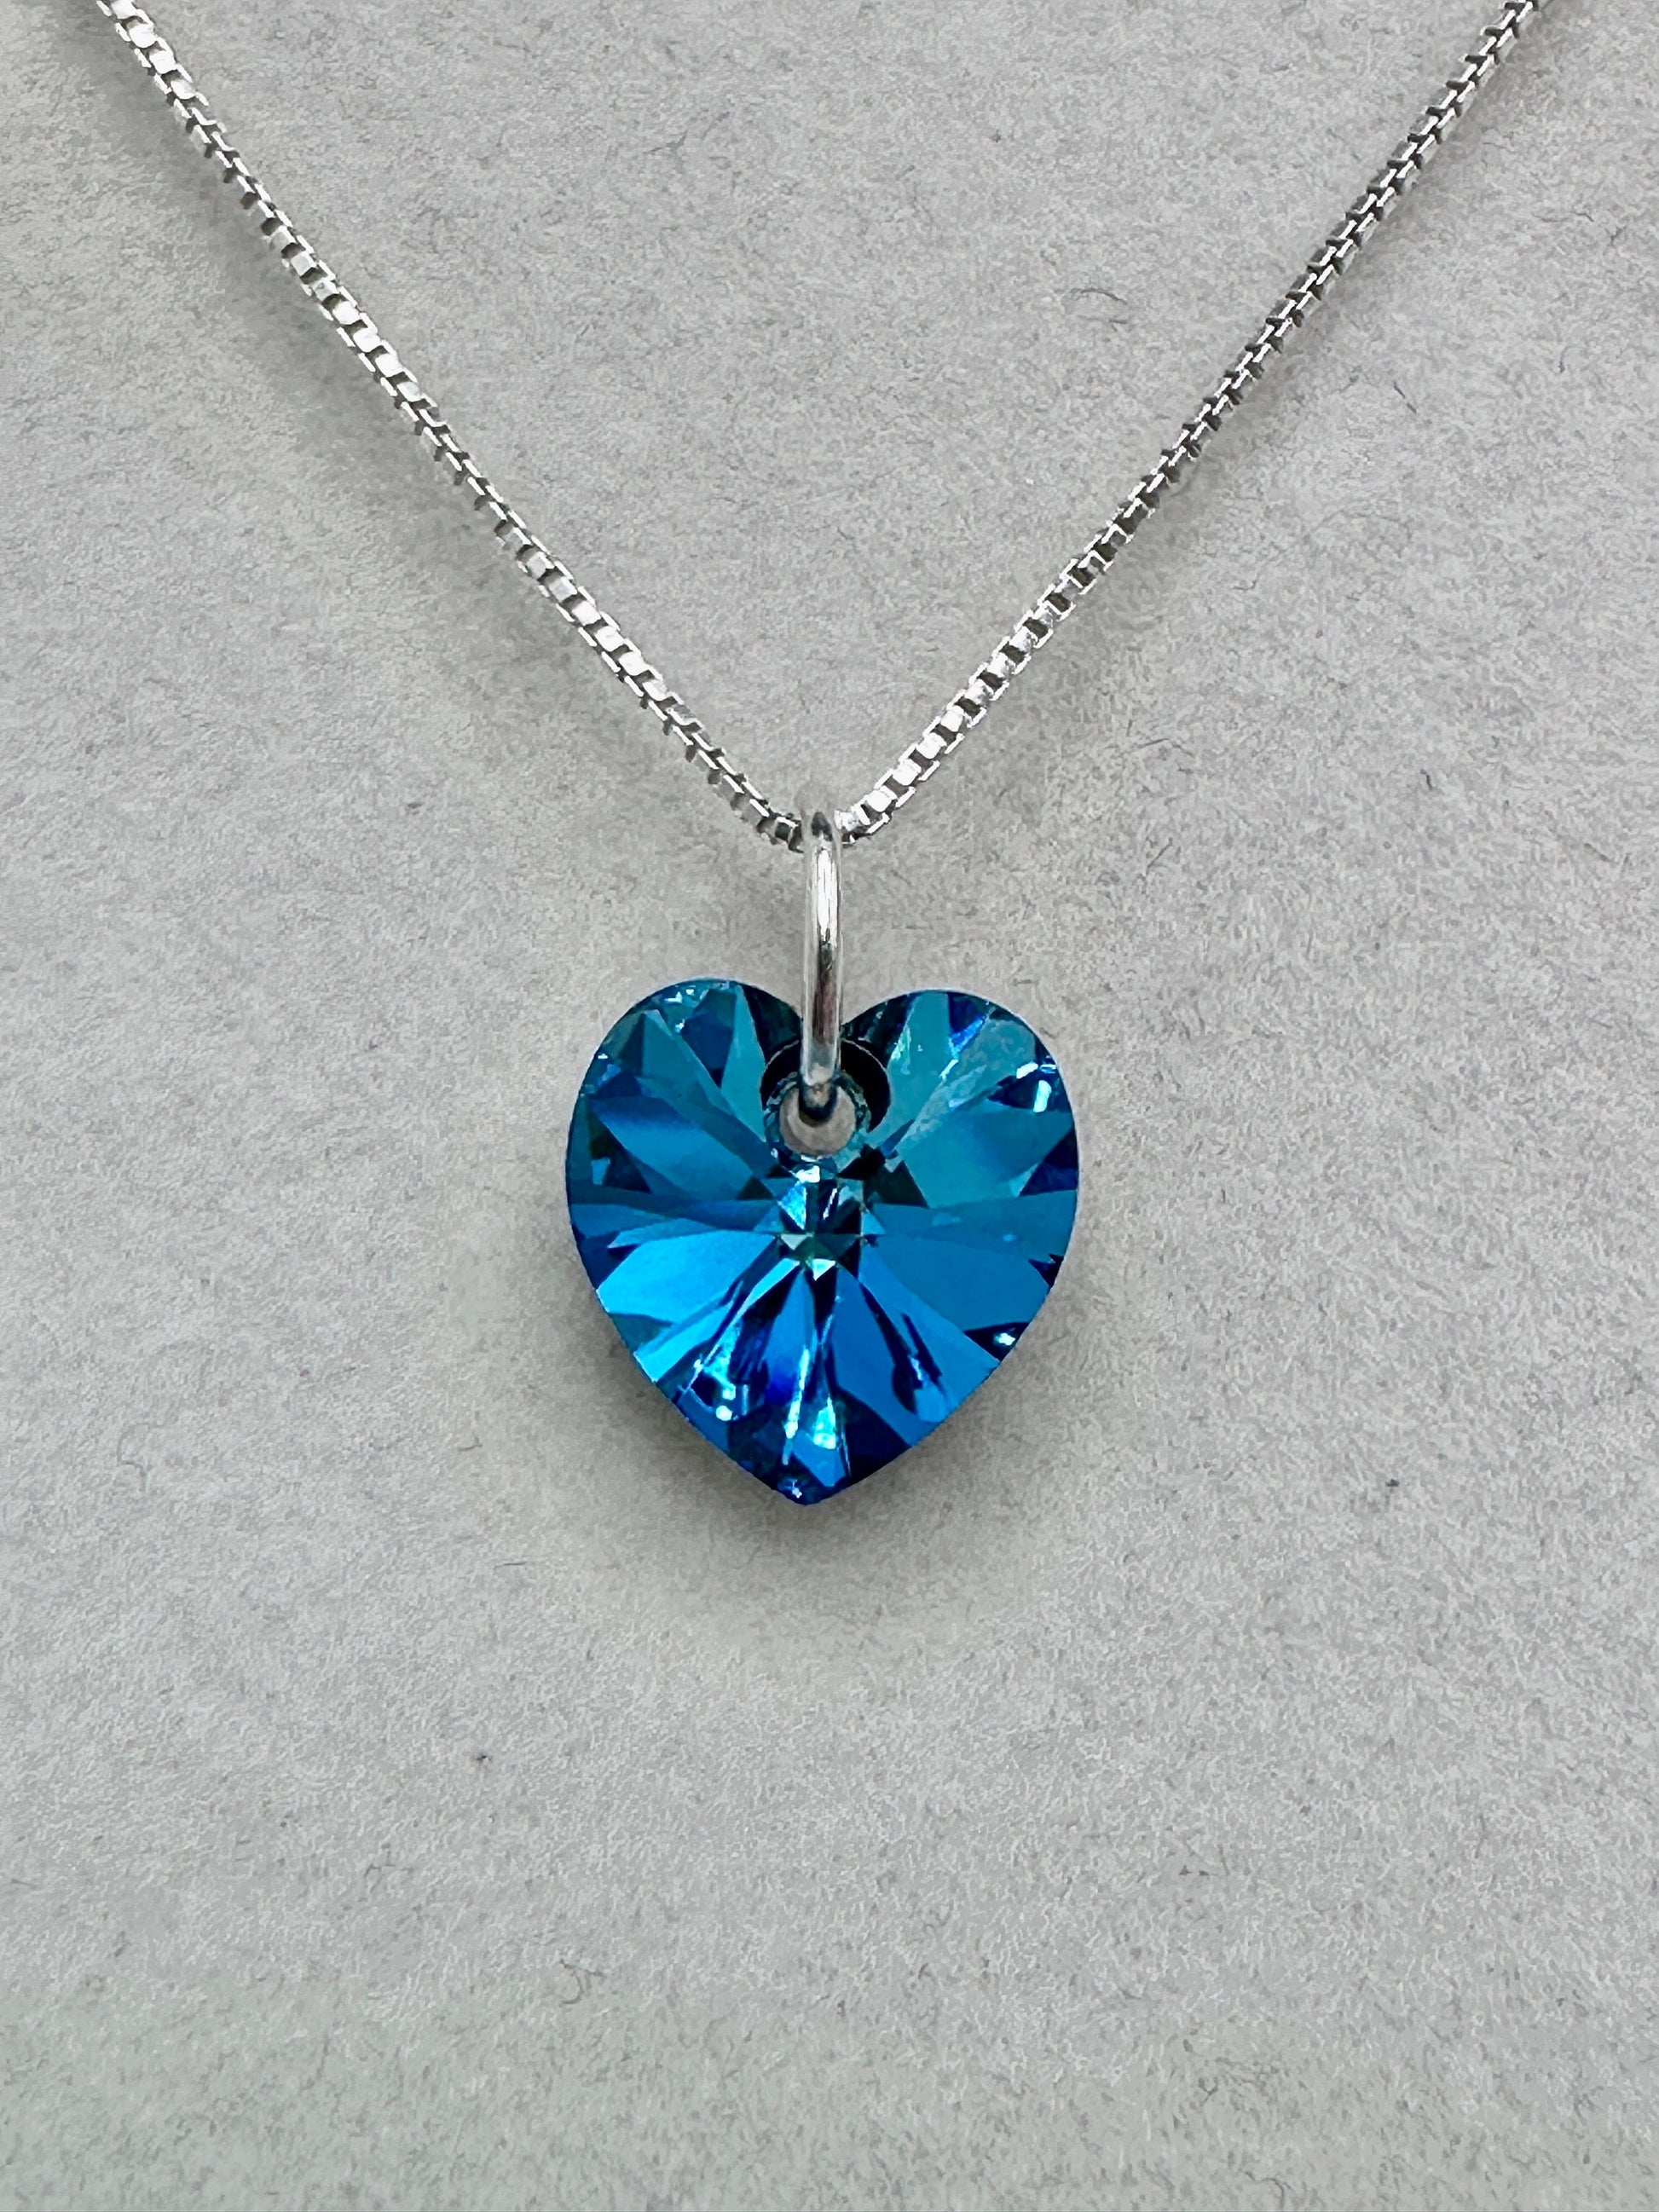 Swarovski Teal / Green Heart Pendant Necklace on 18” Sterling Silver Chain